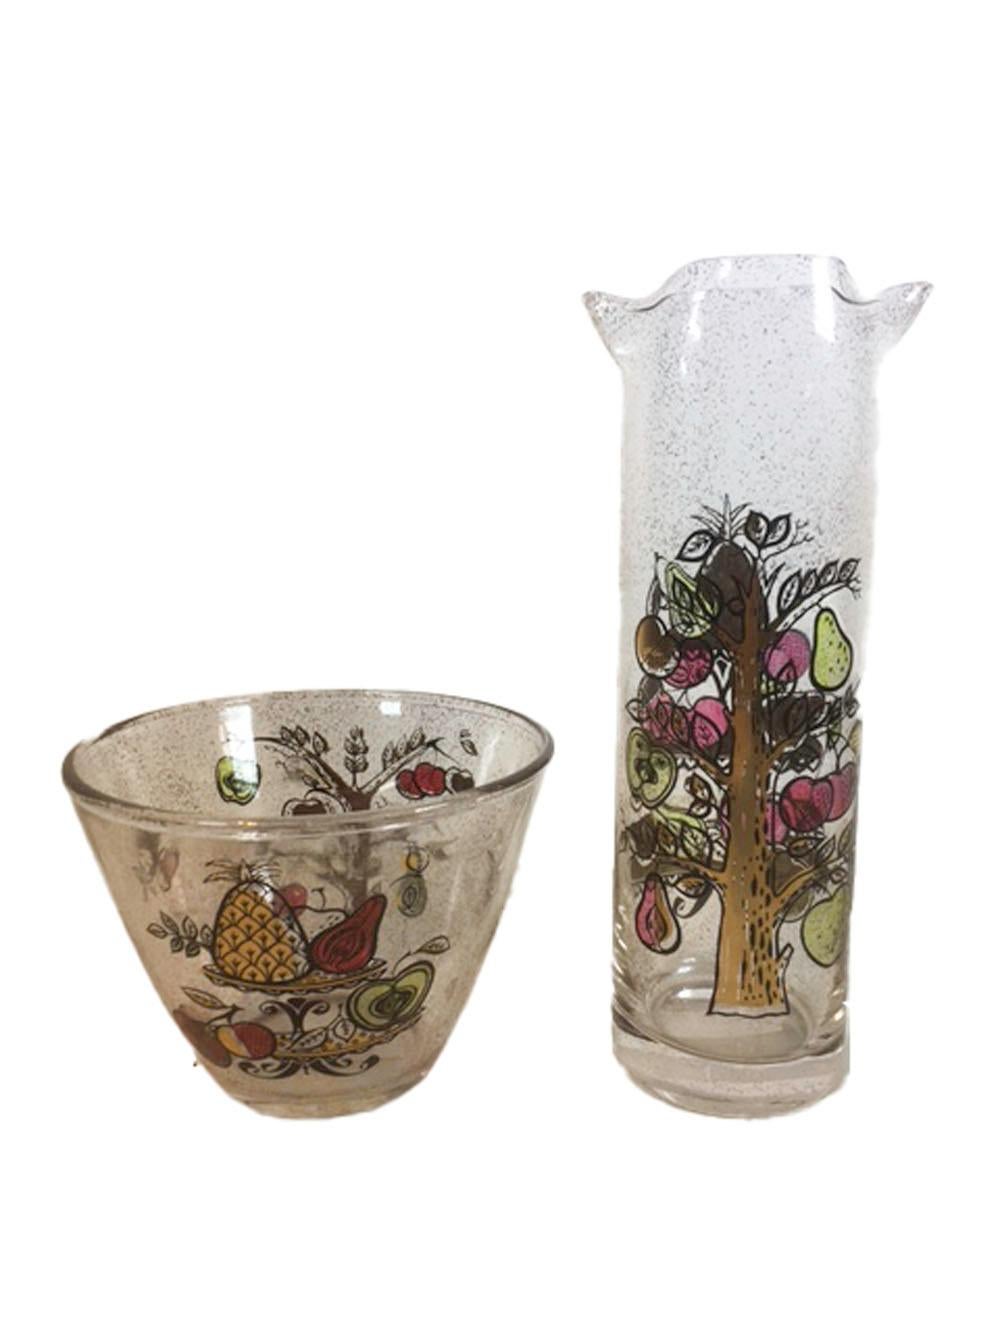 American Mid-20th Century 17-Piece Cocktail / Barware Set in 'Tree of Life' Pattern For Sale